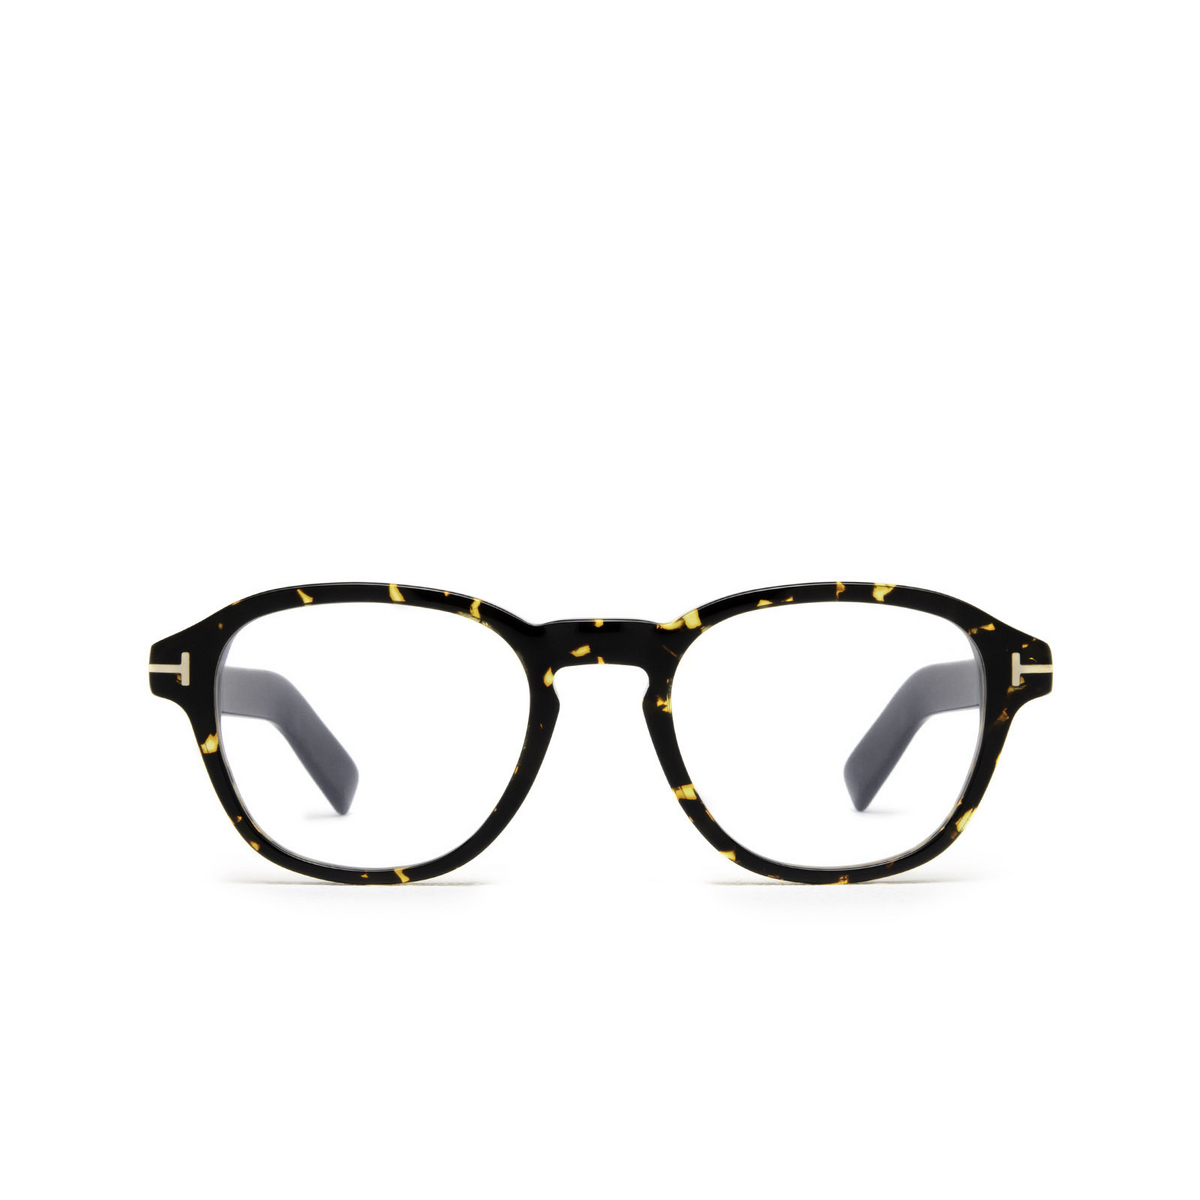 Tom Ford® Square Eyeglasses: FT5821-B color Colored Havana 055 - front view.